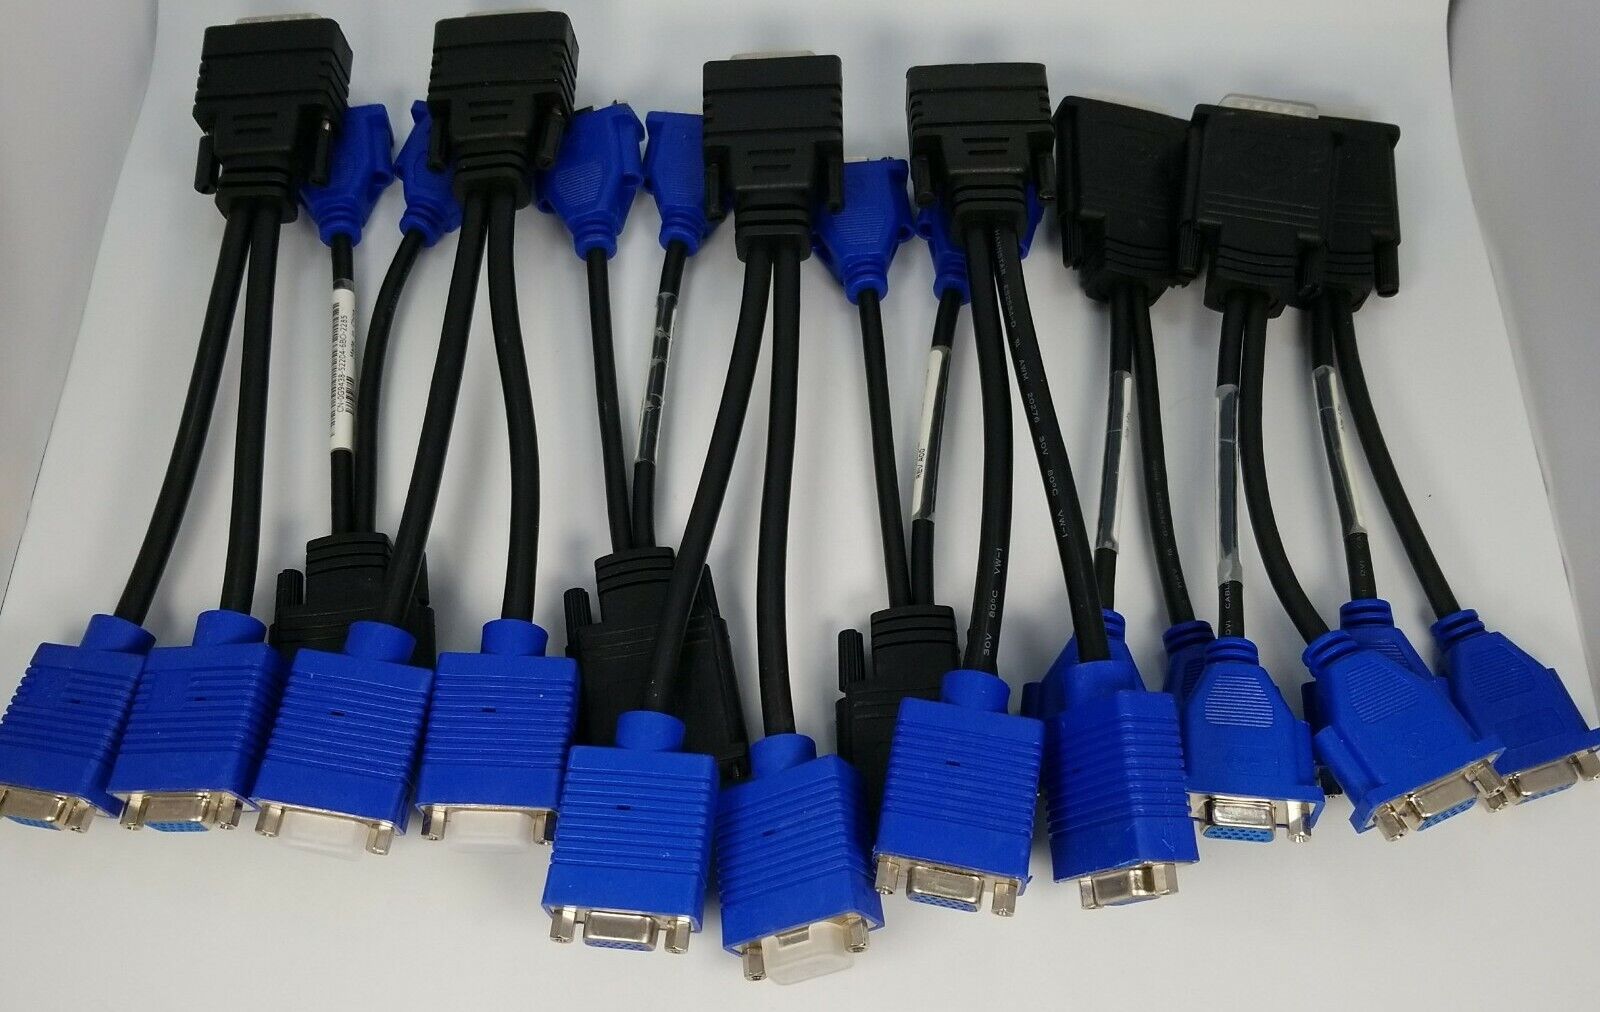 Lot of 10 DMS-59 to Dual VGA DMS59 Dual Monitors Cable for Video Card